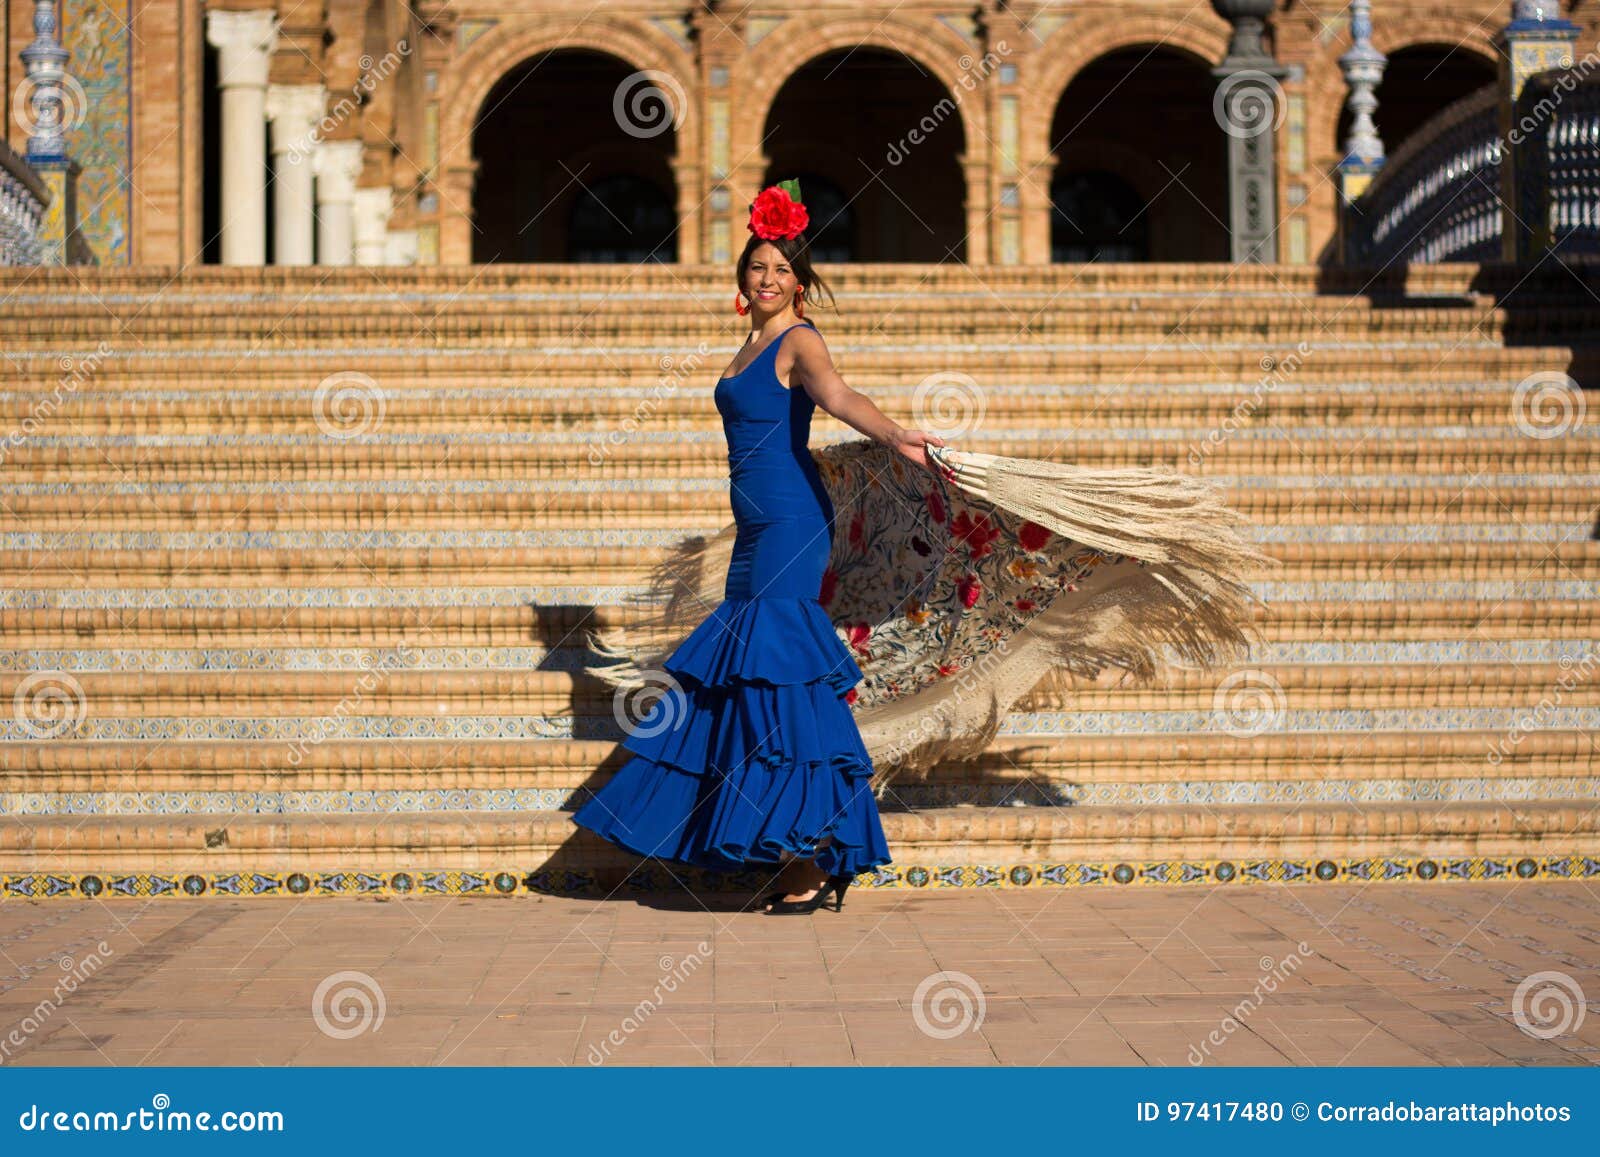 the woman with the blue dress and the red bow dancing